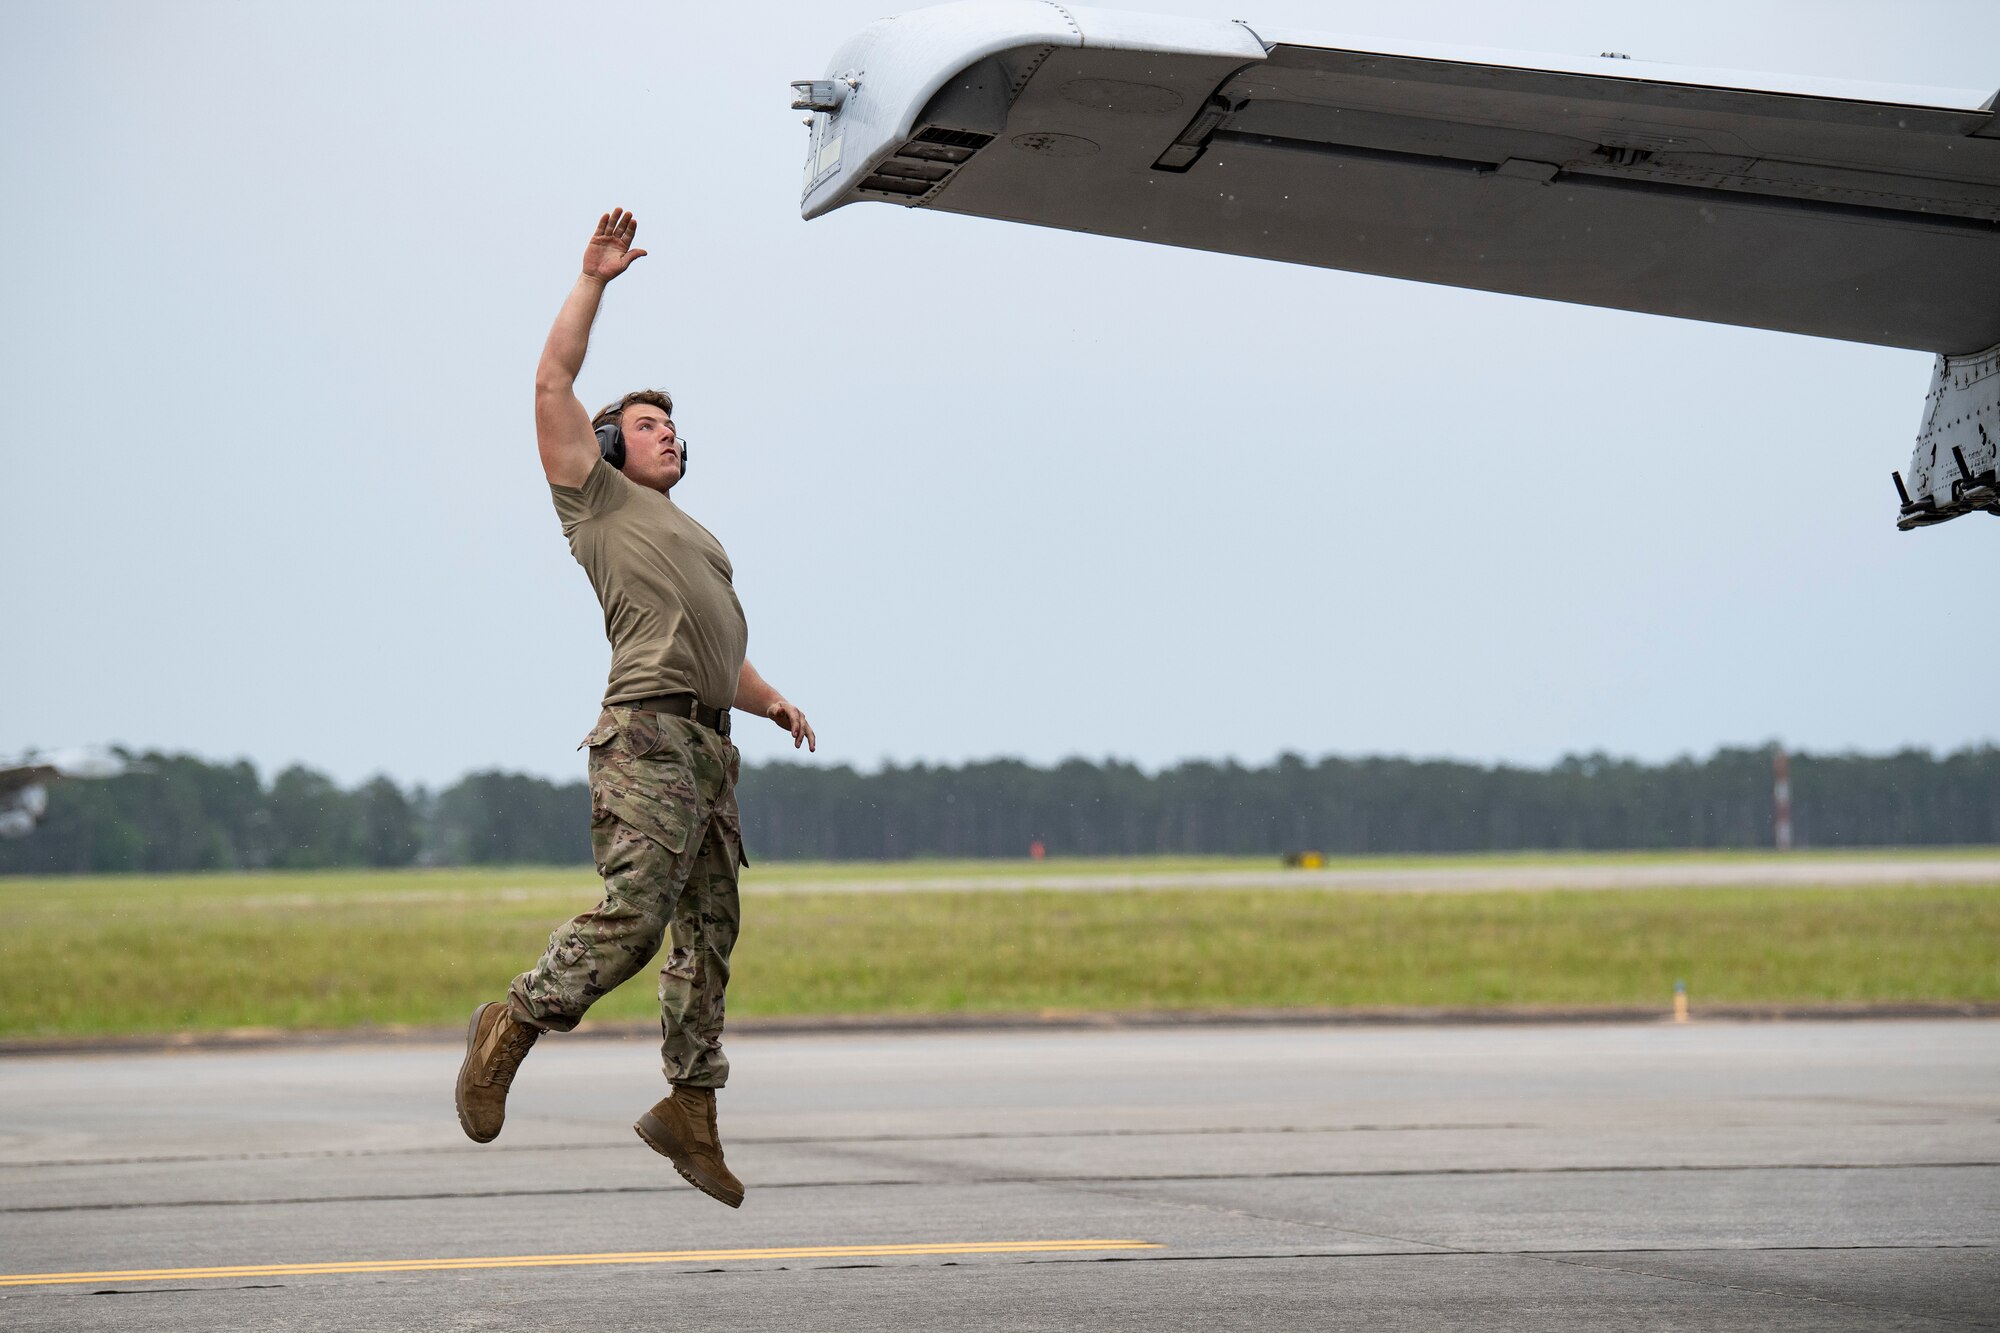 A photo of an Airman jumping to touch the wing tip of an aircraft